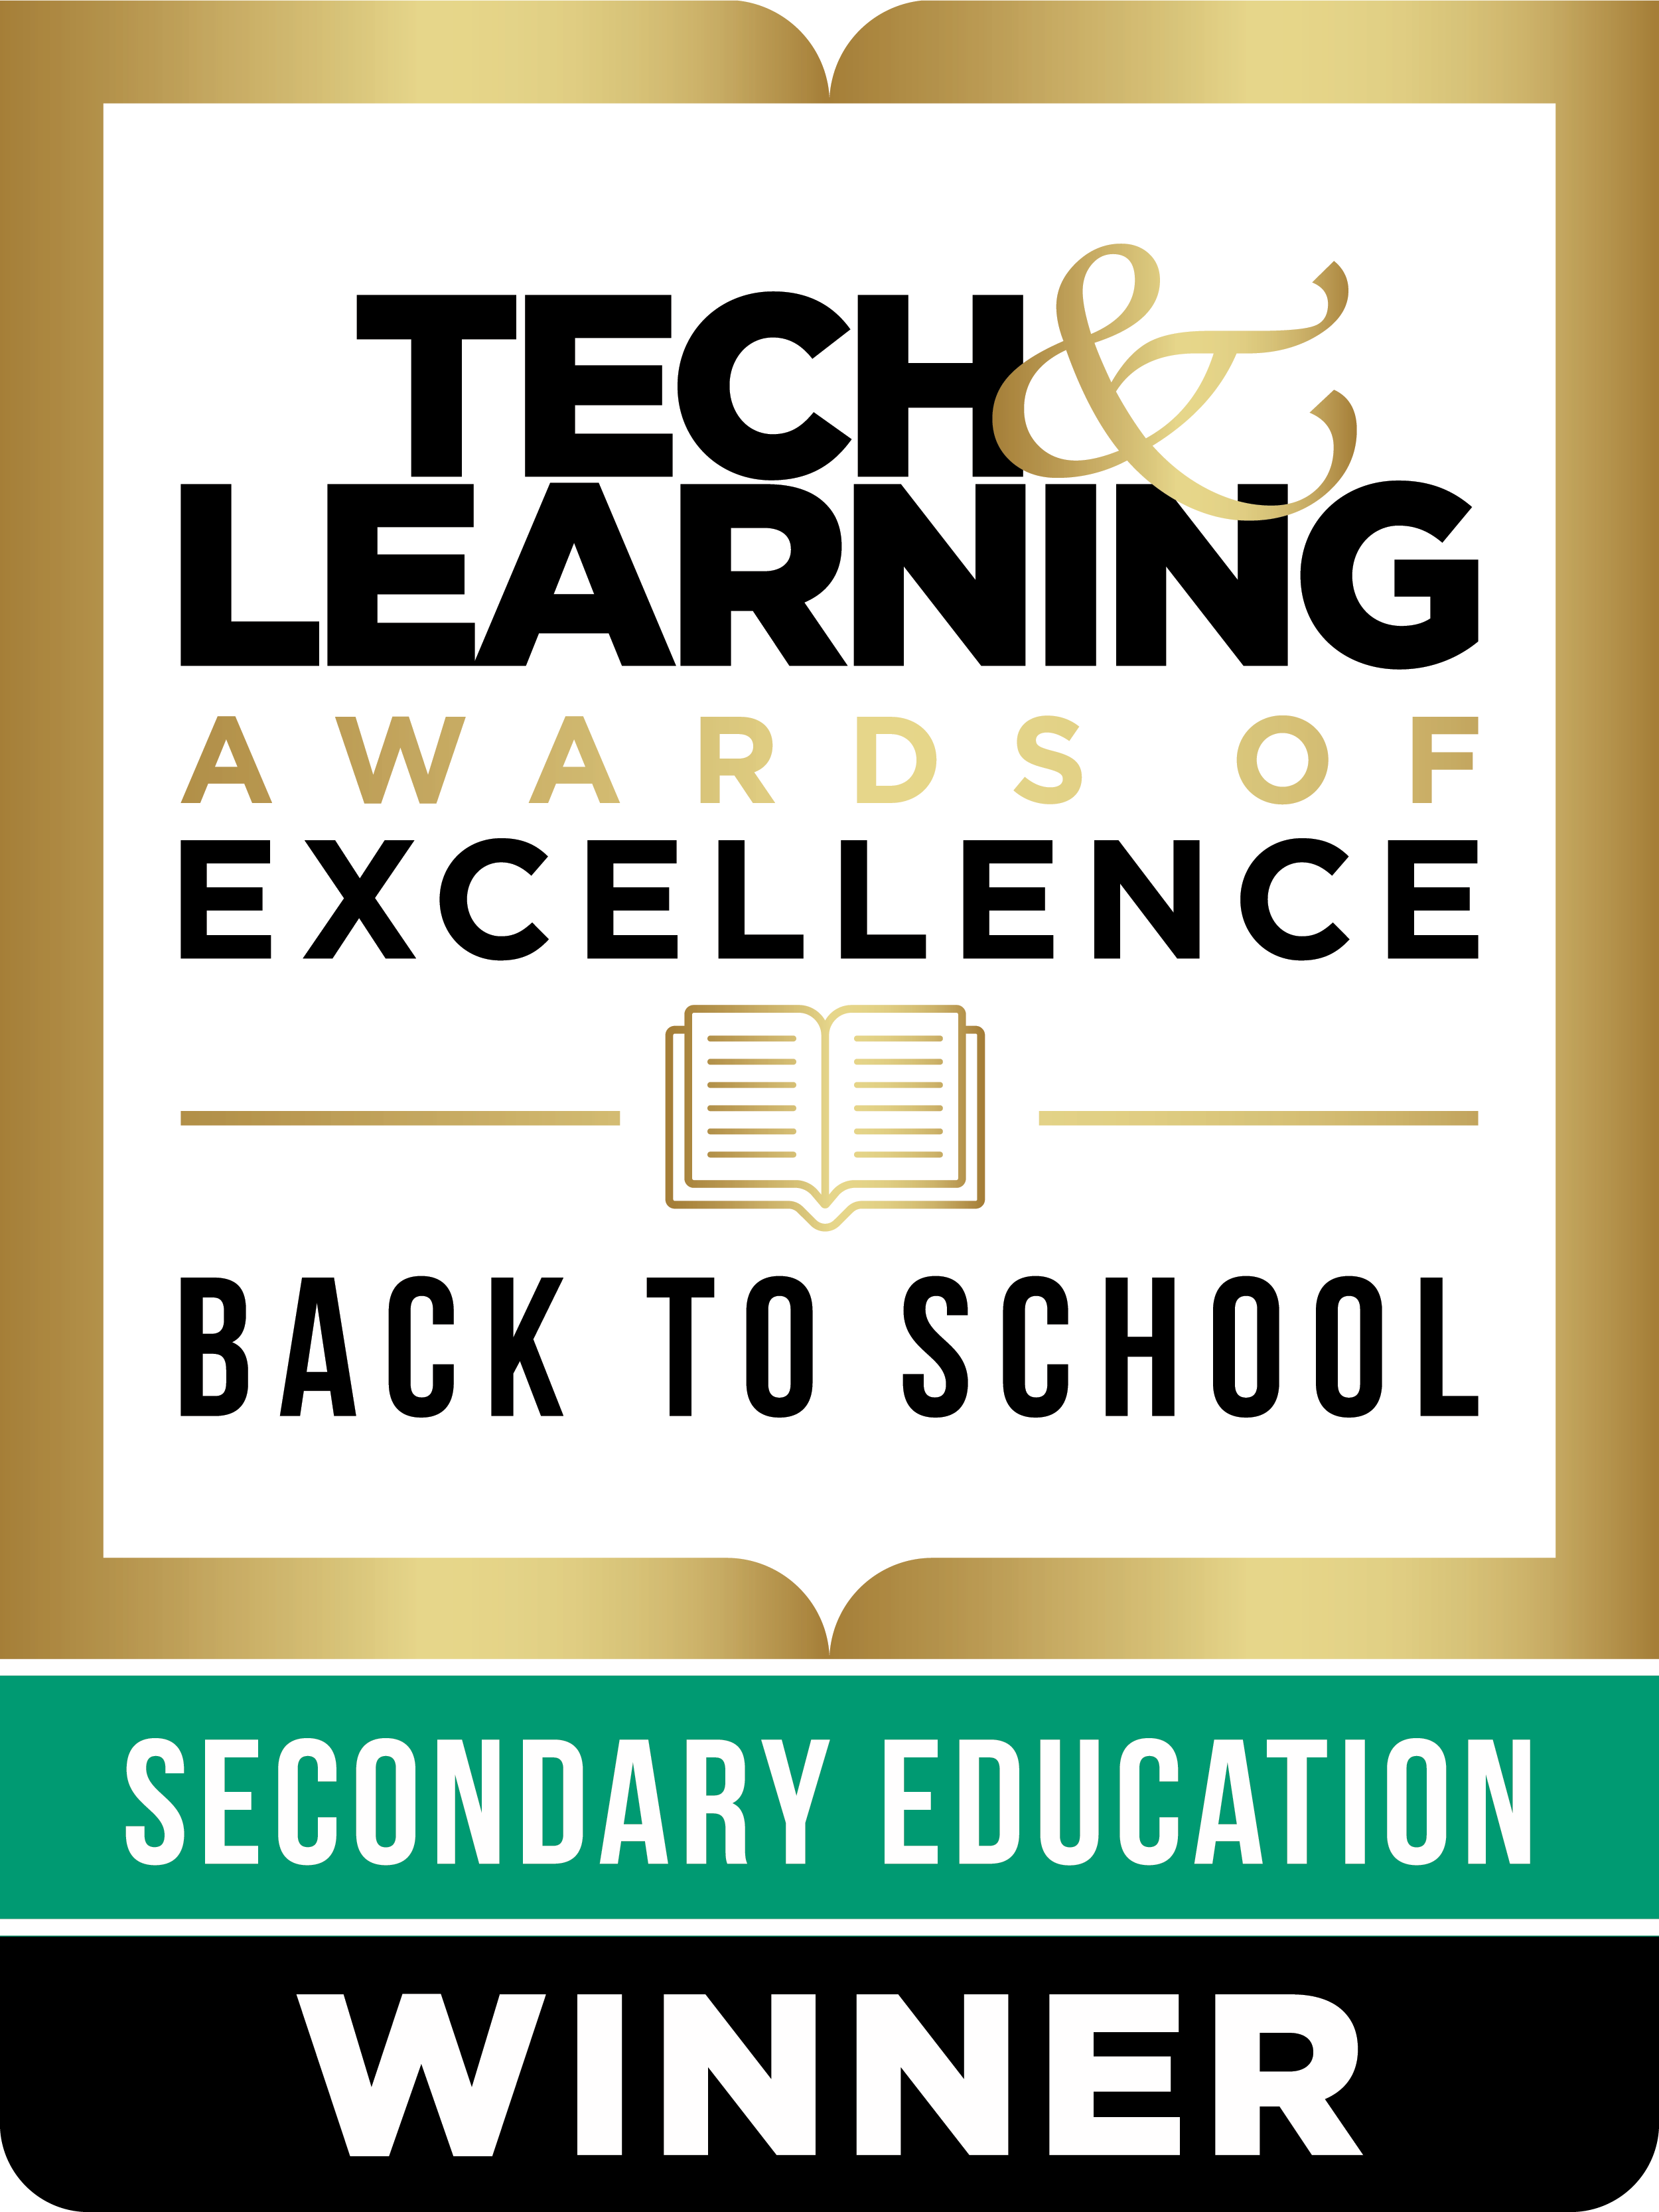 Tech & Learning Awards of Excellence <br>Back to School - Secondary Education